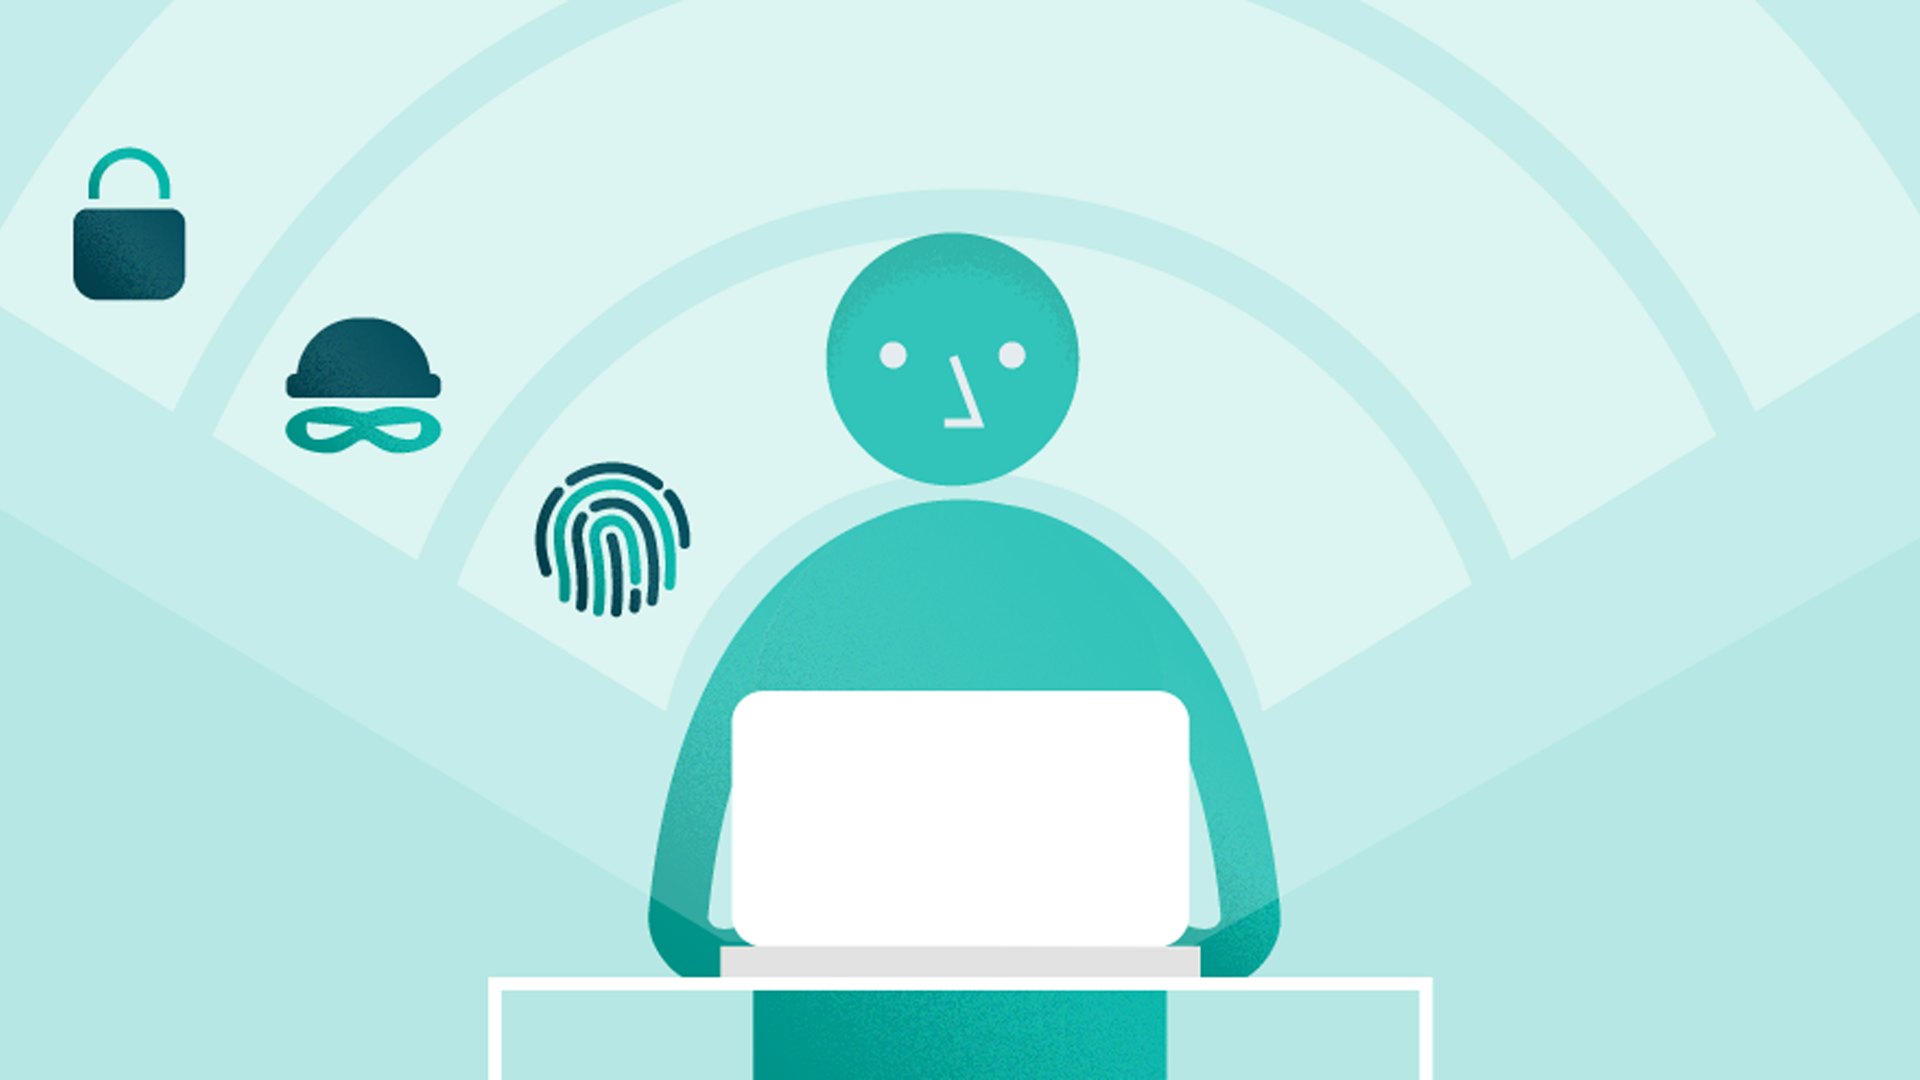 Header graphic of a person using a laptop with online security icons around them.